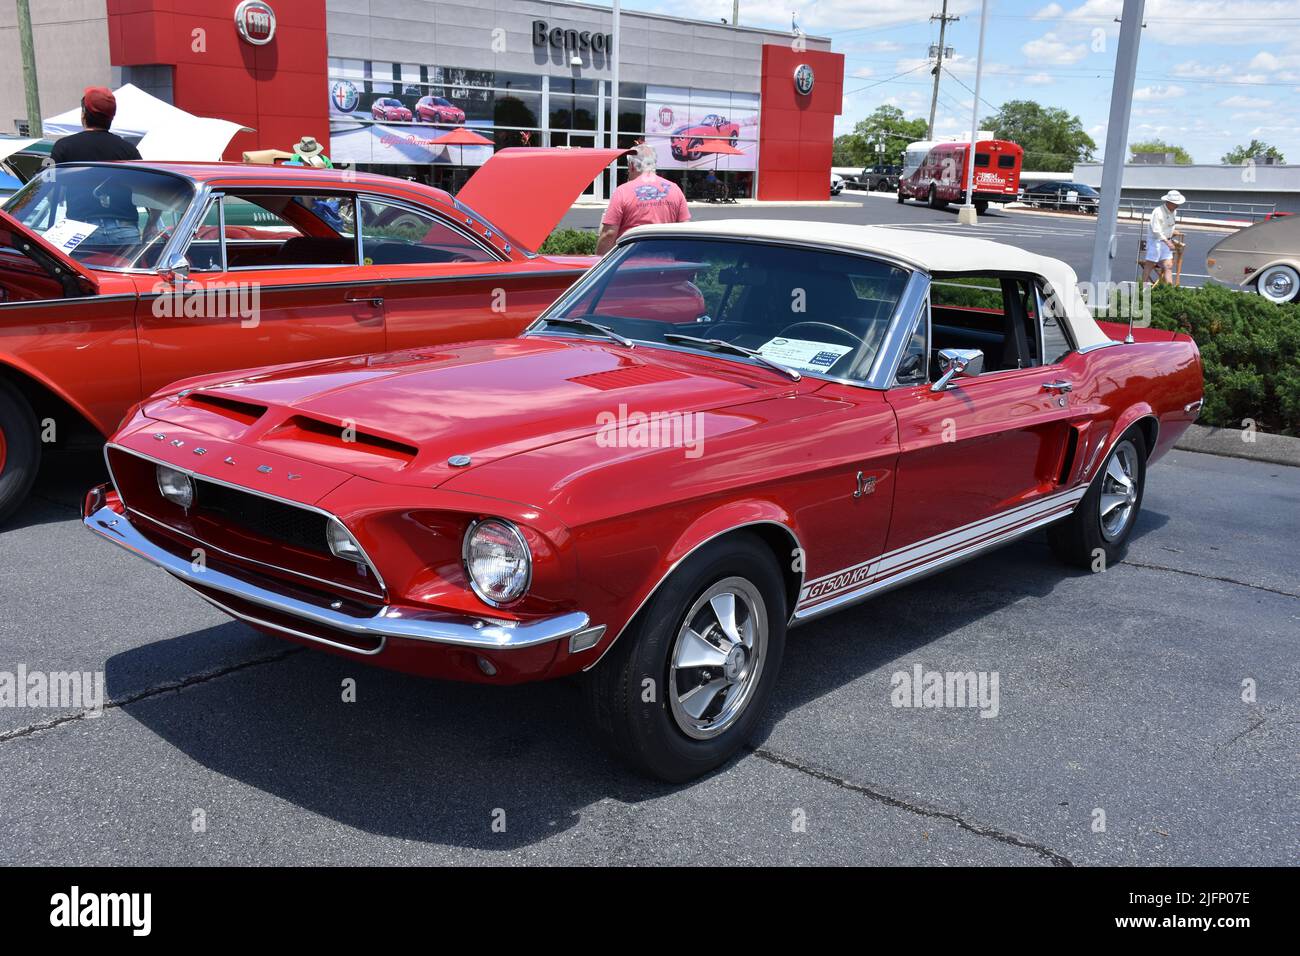 A 1968 Shelby Mustang GT500KR on display at a car show. Stock Photo